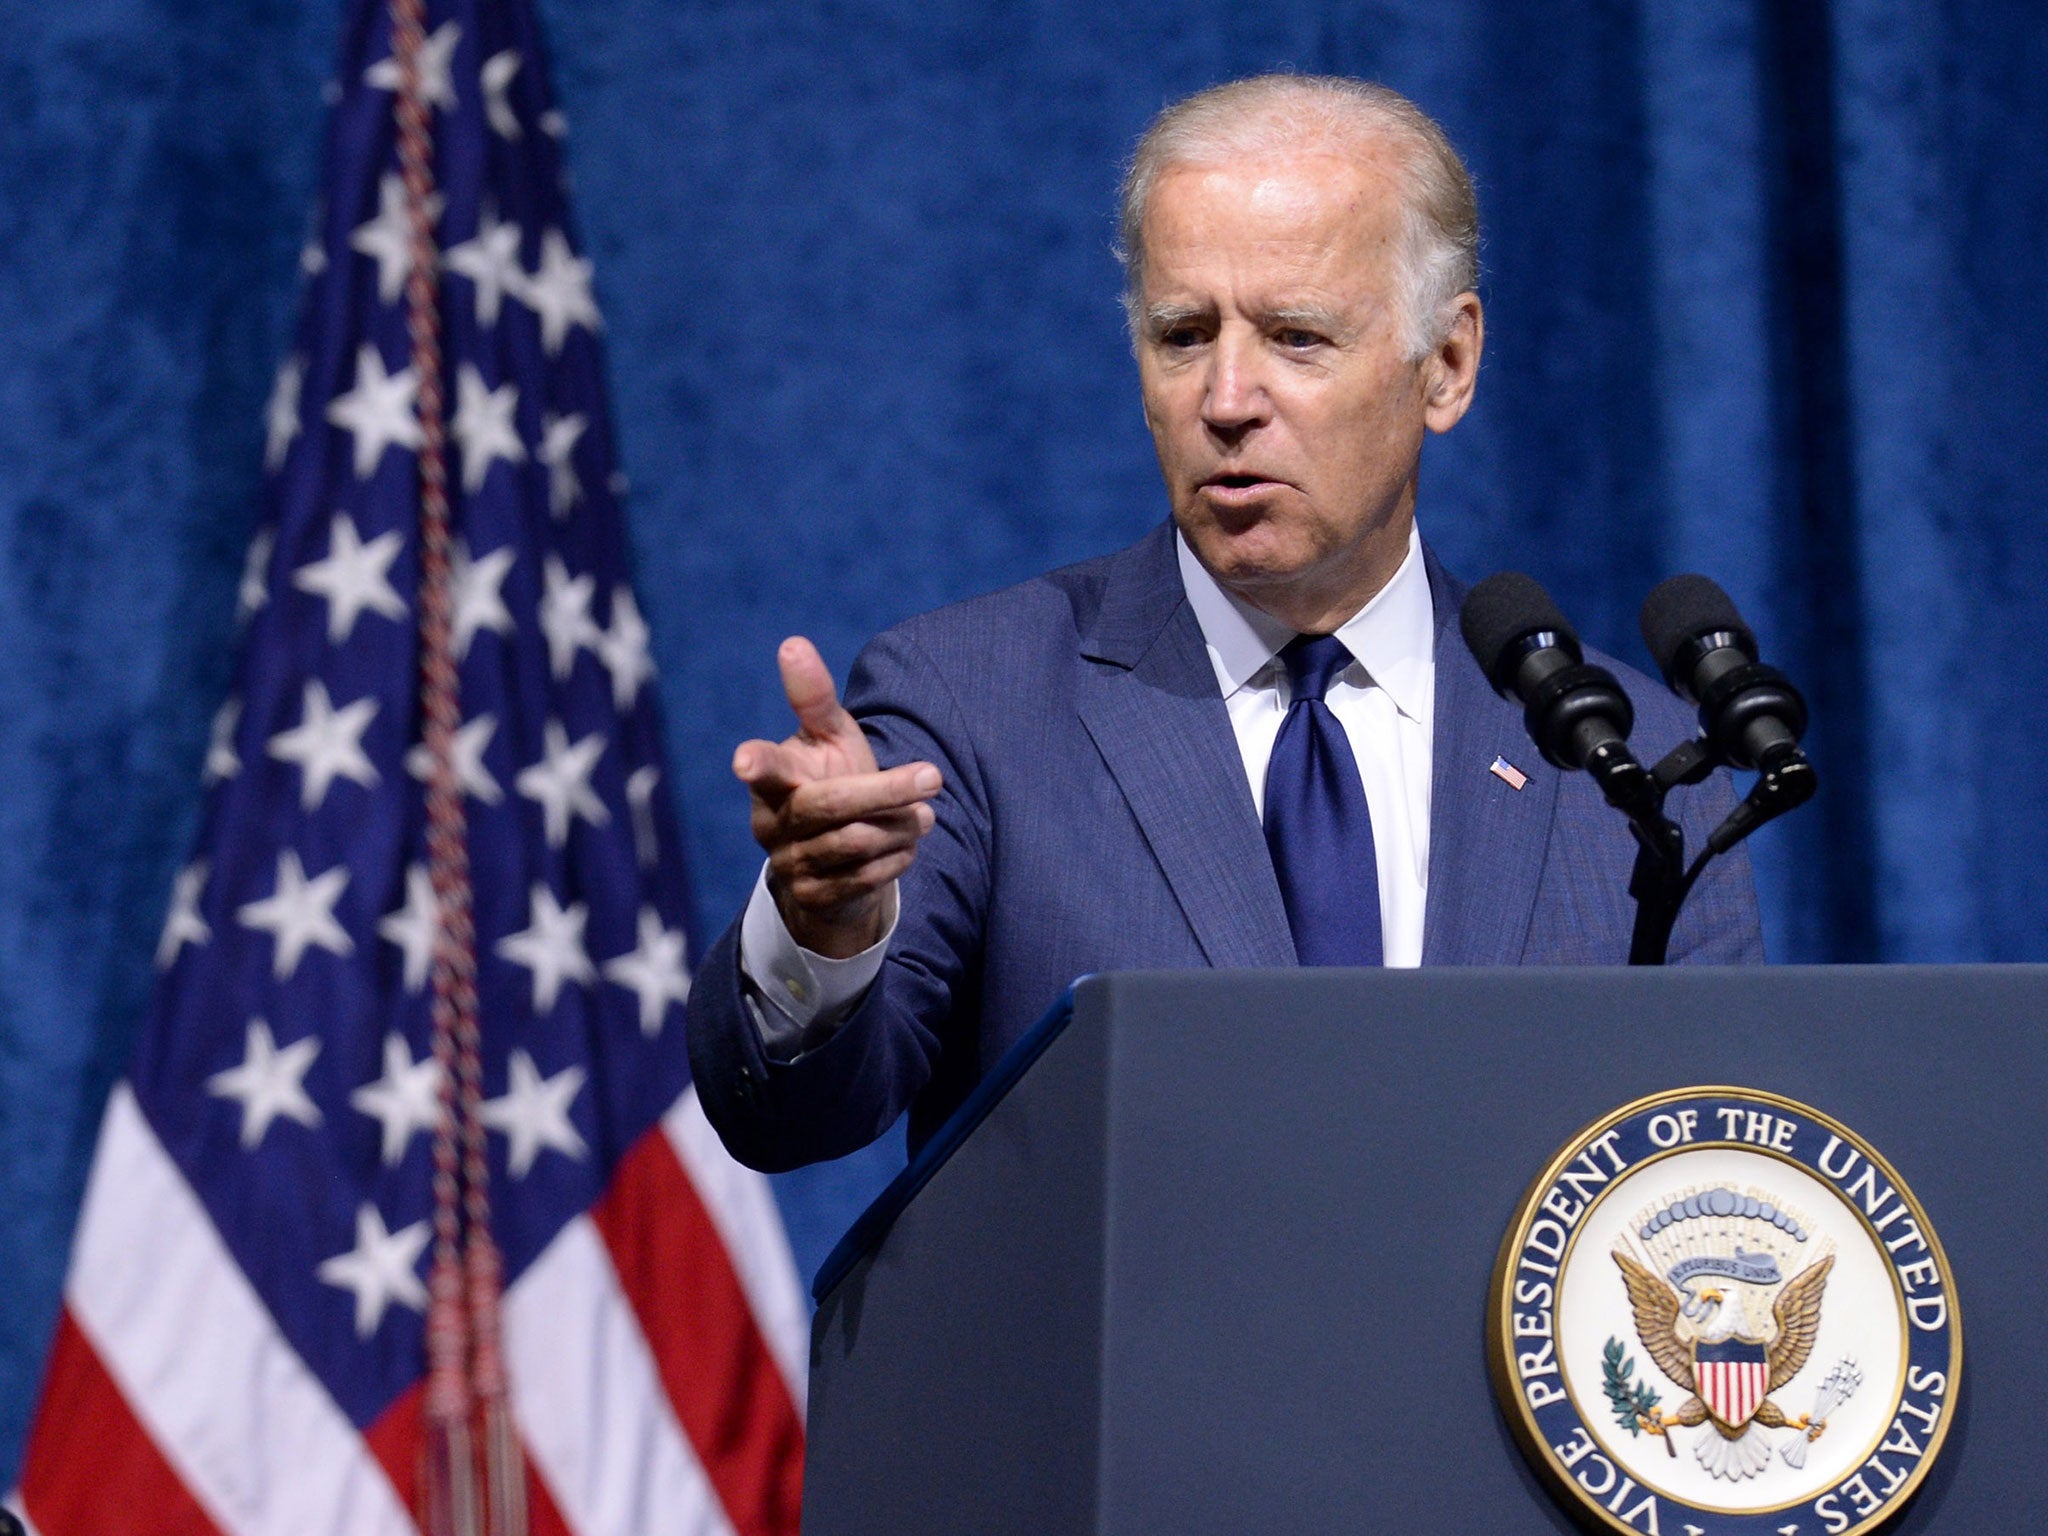 A quiet rumble of encouragement inside Democratic Party ranks for Joe Biden to get off the fence and declare himself a candidate for president is growing steadily louder amid mounting evidence that Hillary Clinton’s campaign may be in trouble